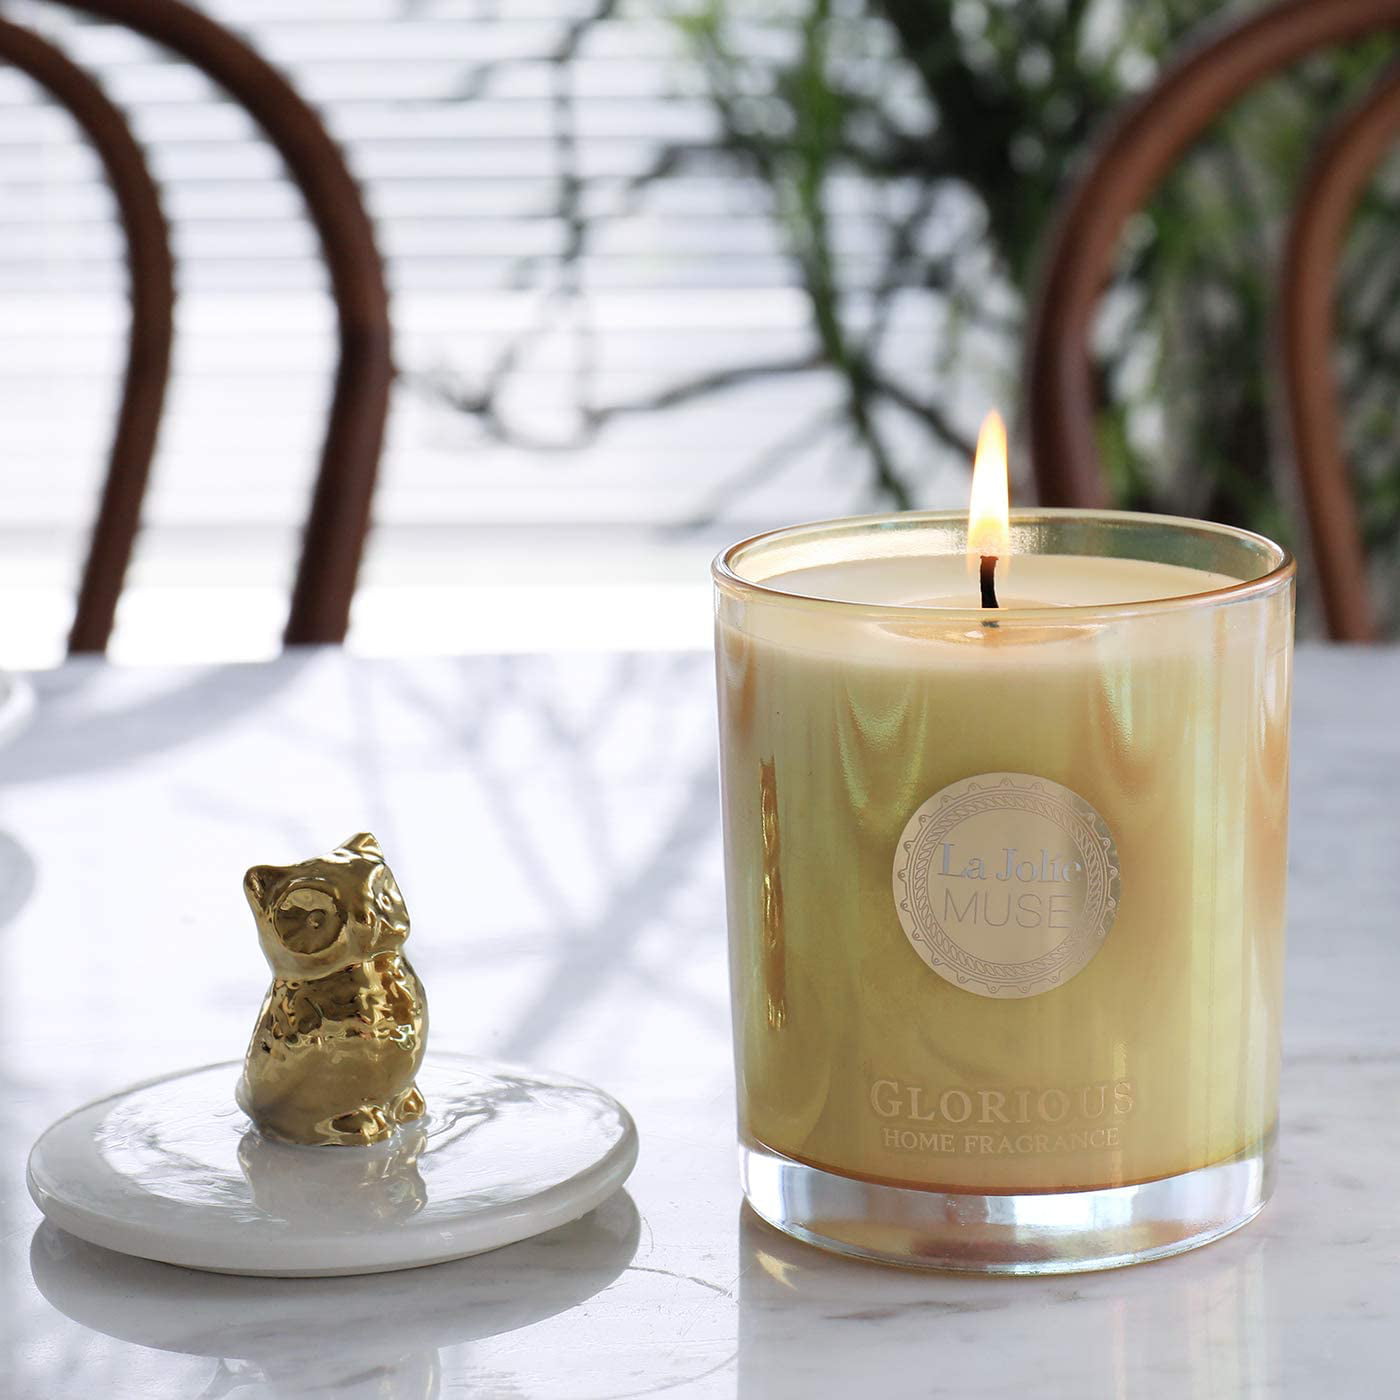 60 Hours Long Burning LA JOLIE MUSE Rose Floral Scented Candle 240G Candle for Home 100% Natural Wax Christmas Candle Gift Cute Squirrel Decorative Glass Candle 